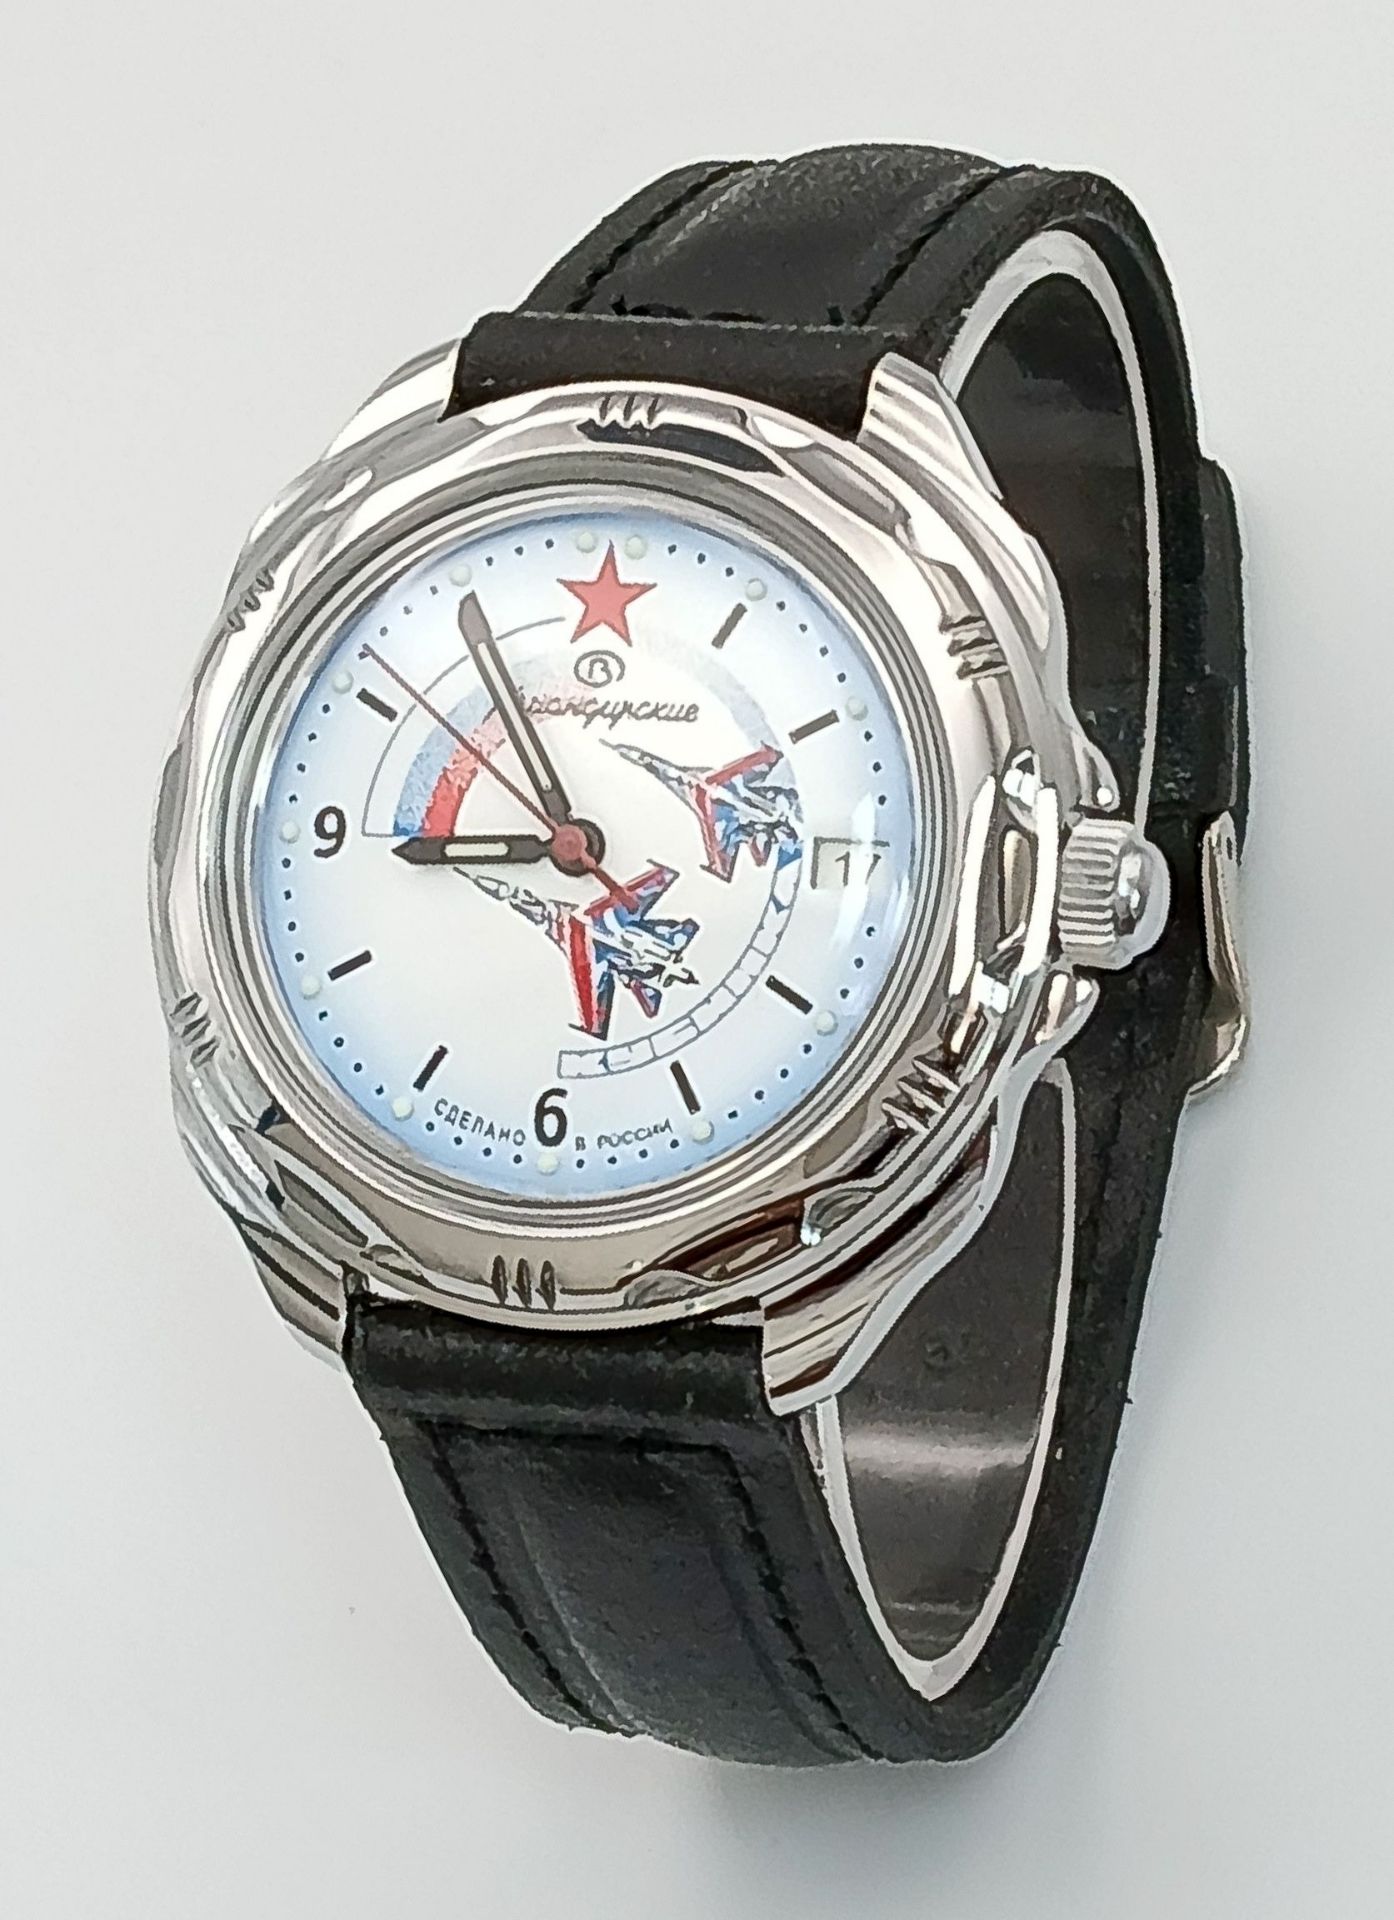 A Vostok Automatic Gents Watch. Black leather strap. Stainless steel case - 40mm. White dial with